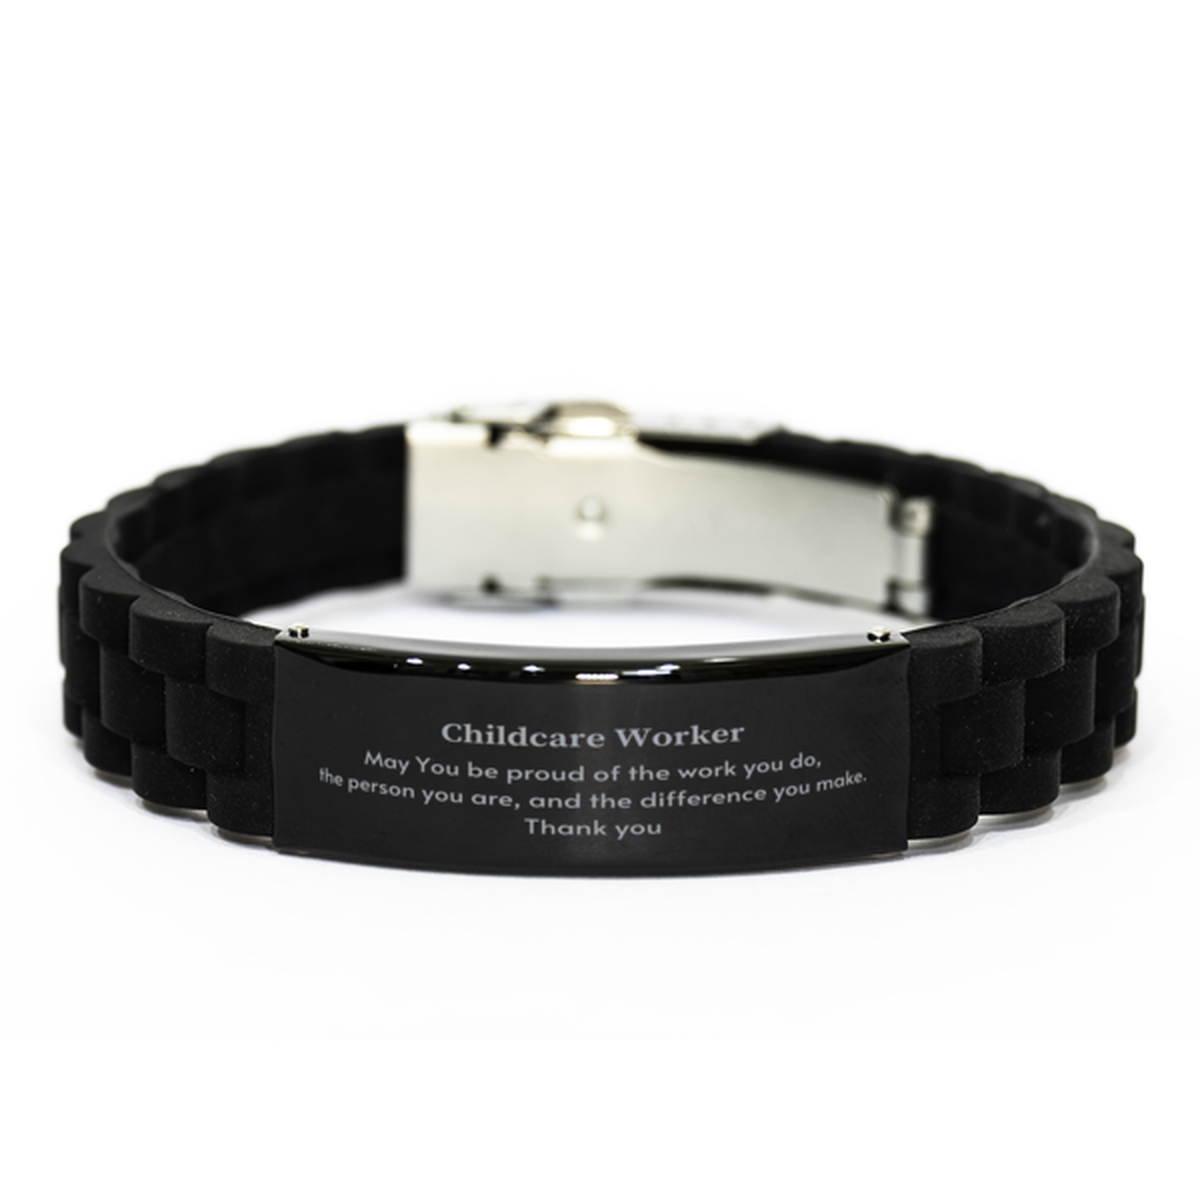 Heartwarming Black Glidelock Clasp Bracelet Retirement Coworkers Gifts for Childcare Worker, Childcare Worker May You be proud of the work you do, the person you are Gifts for Boss Men Women Friends